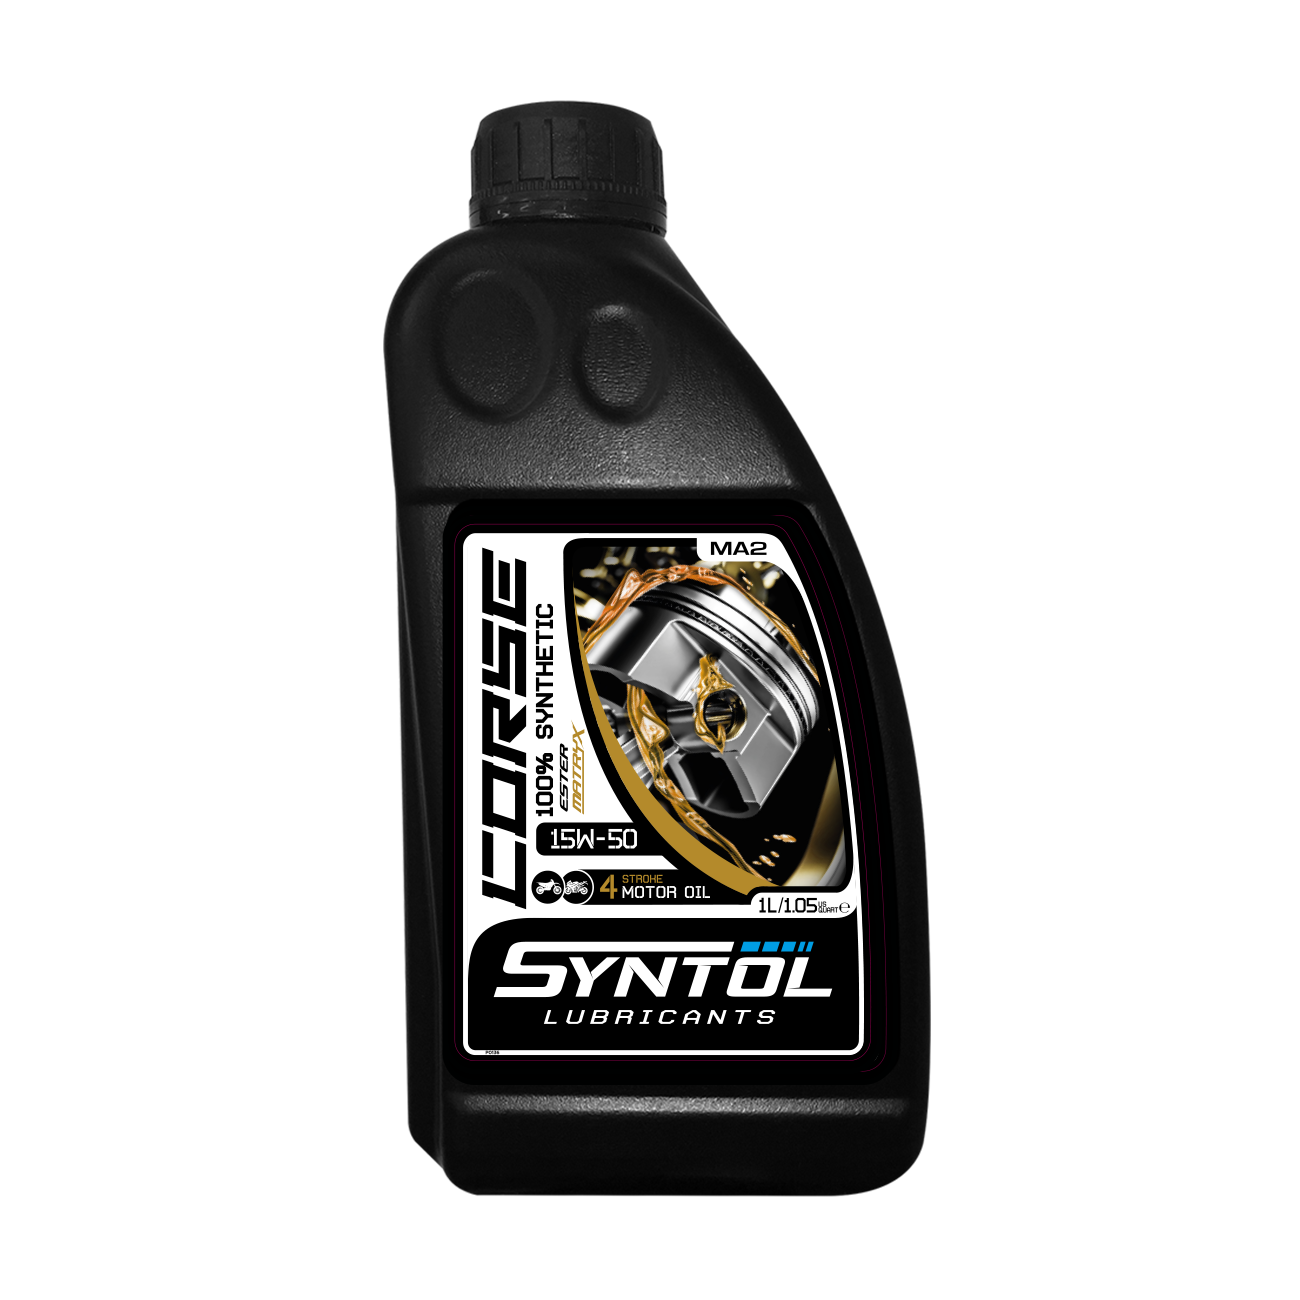 Syntol Corse 4T 15W-50 Motorcycle Engine Oil - 1 Litre-F0082-1-Oils and Lubricants-Pyramid Motorcycle Accessories